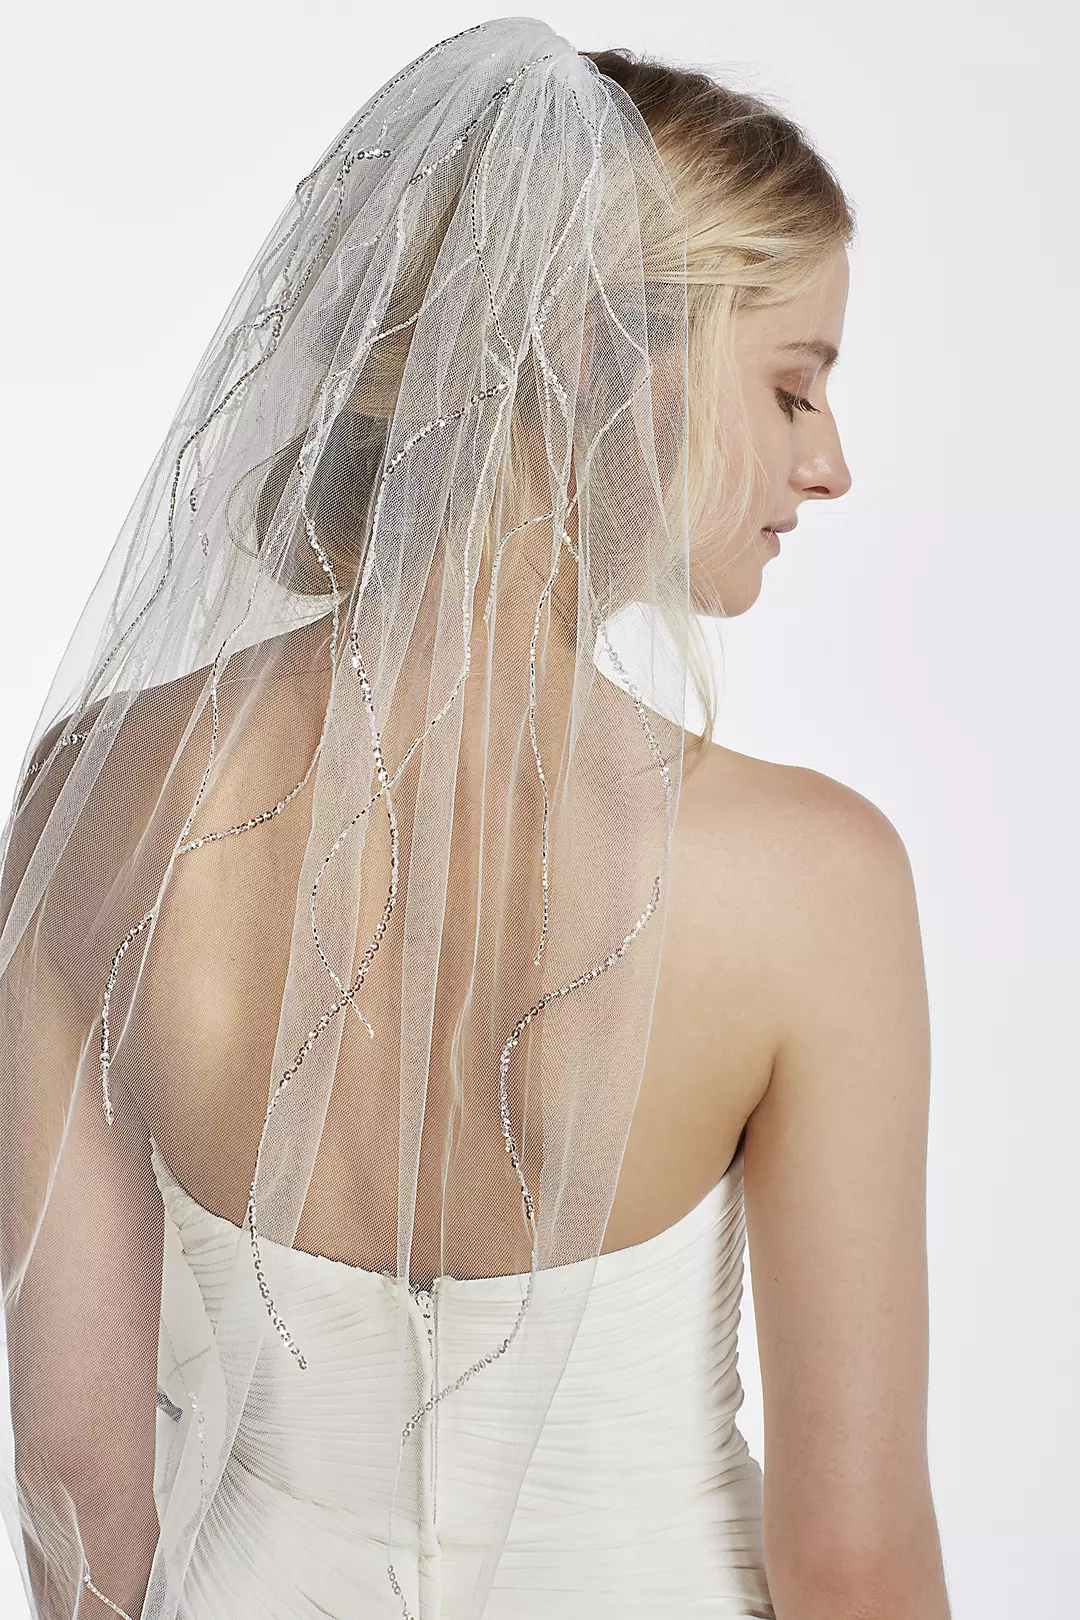 One Tier Mid Length Veil with Beaded Linear Image 2